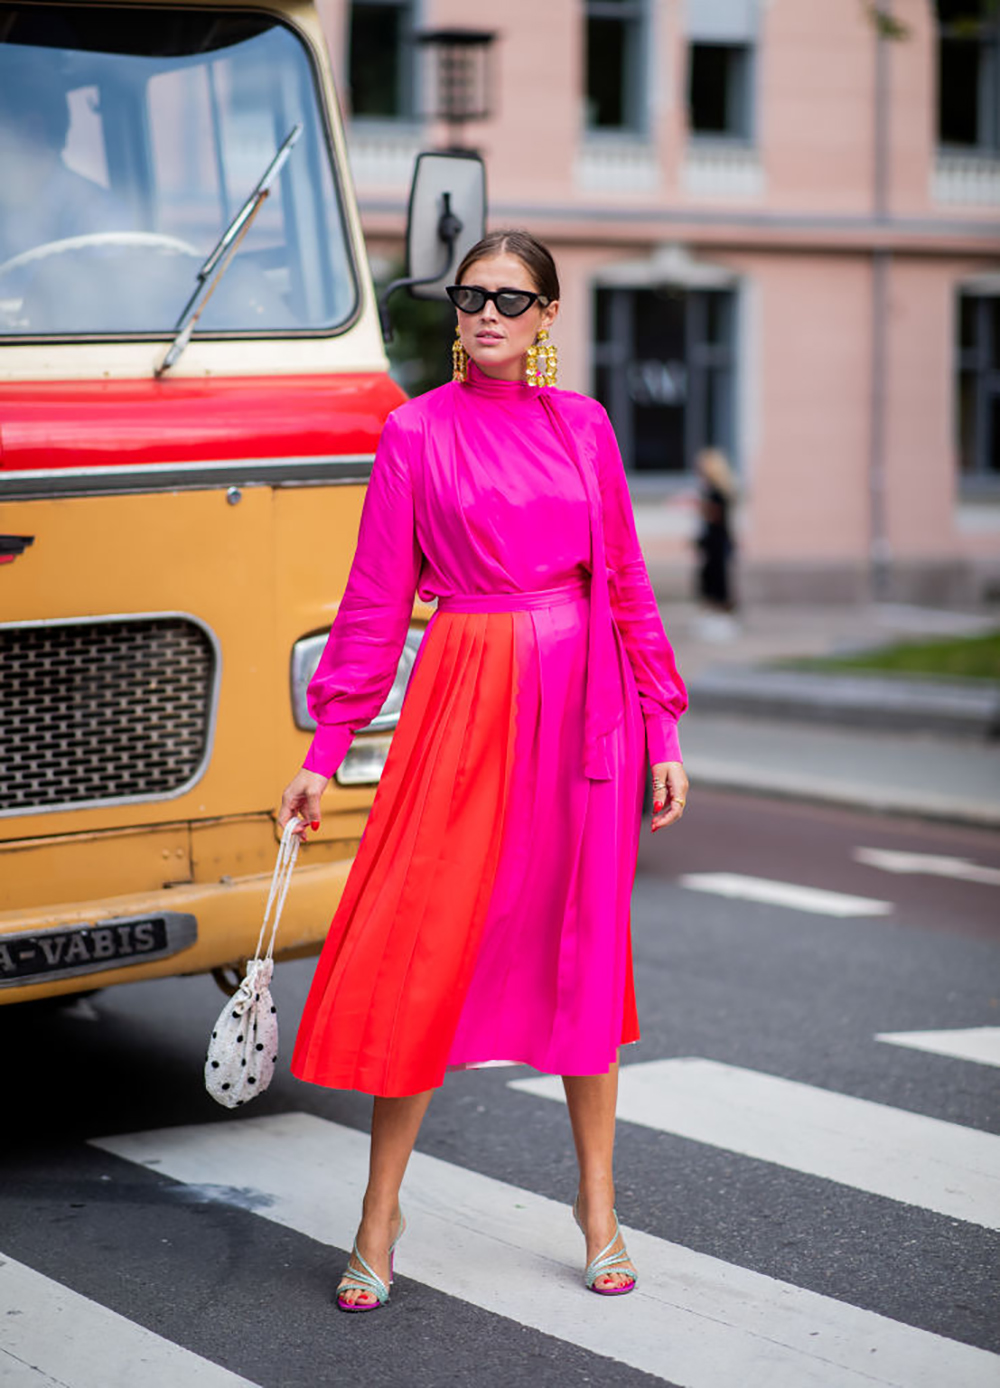 OSLO, NORWAY - AUGUST 15: Darja Barannik wearing pink dress is seen outside Line of Oslo during Oslo Runway SS19 on August 15, 2018 in Oslo, Norway. (Photo by Christian Vierig/Getty Images)